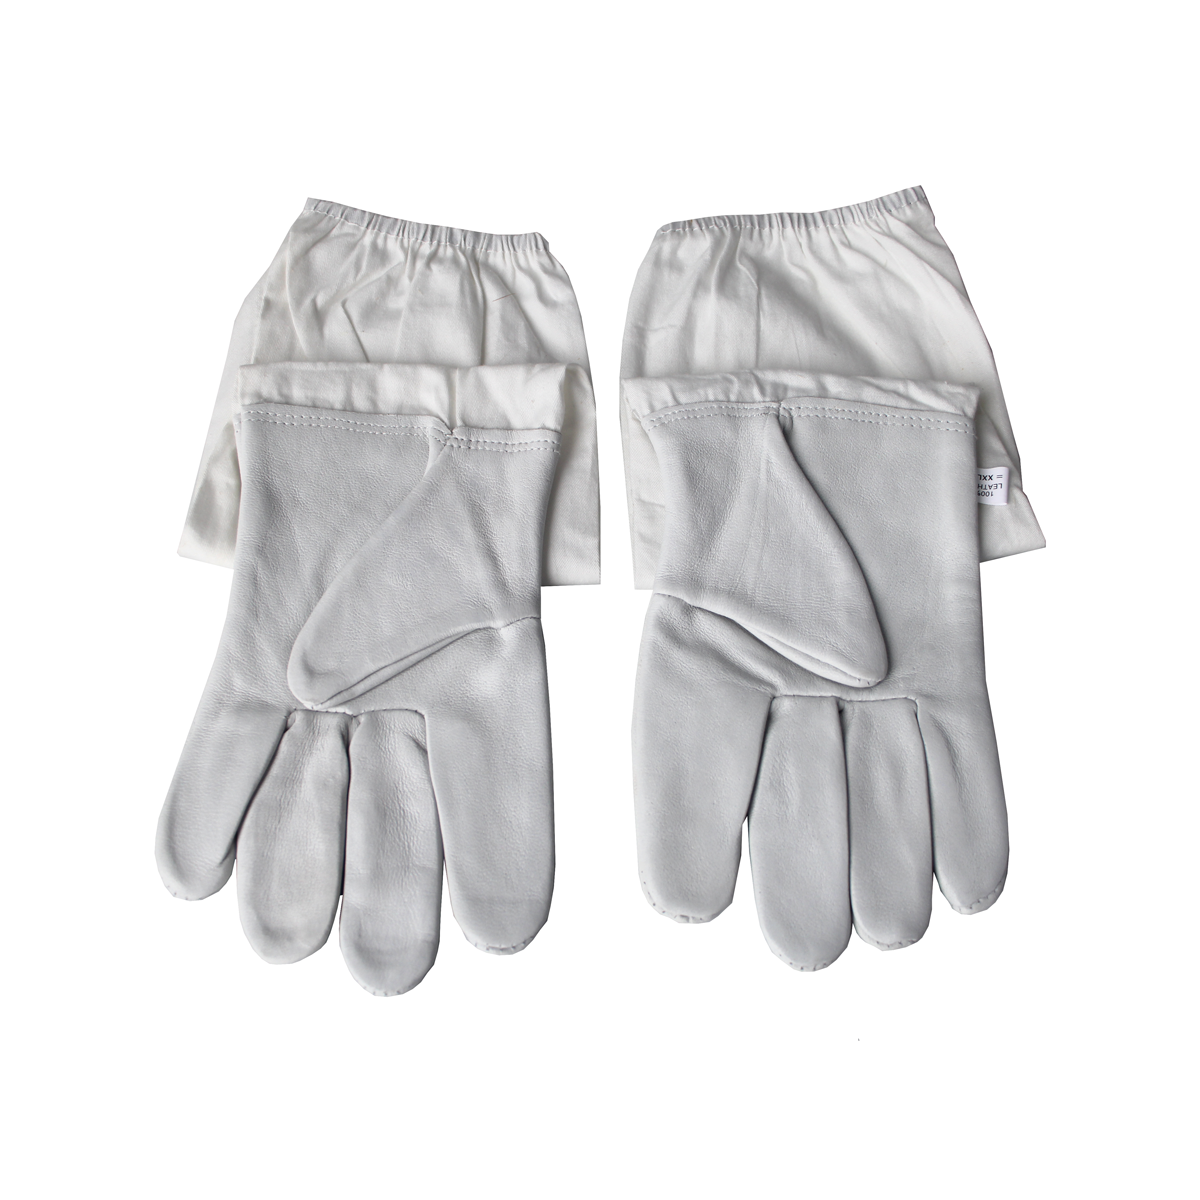 Elbow Length Thick Sheepskin Leather Gloves That Are Folded Revealing Hands